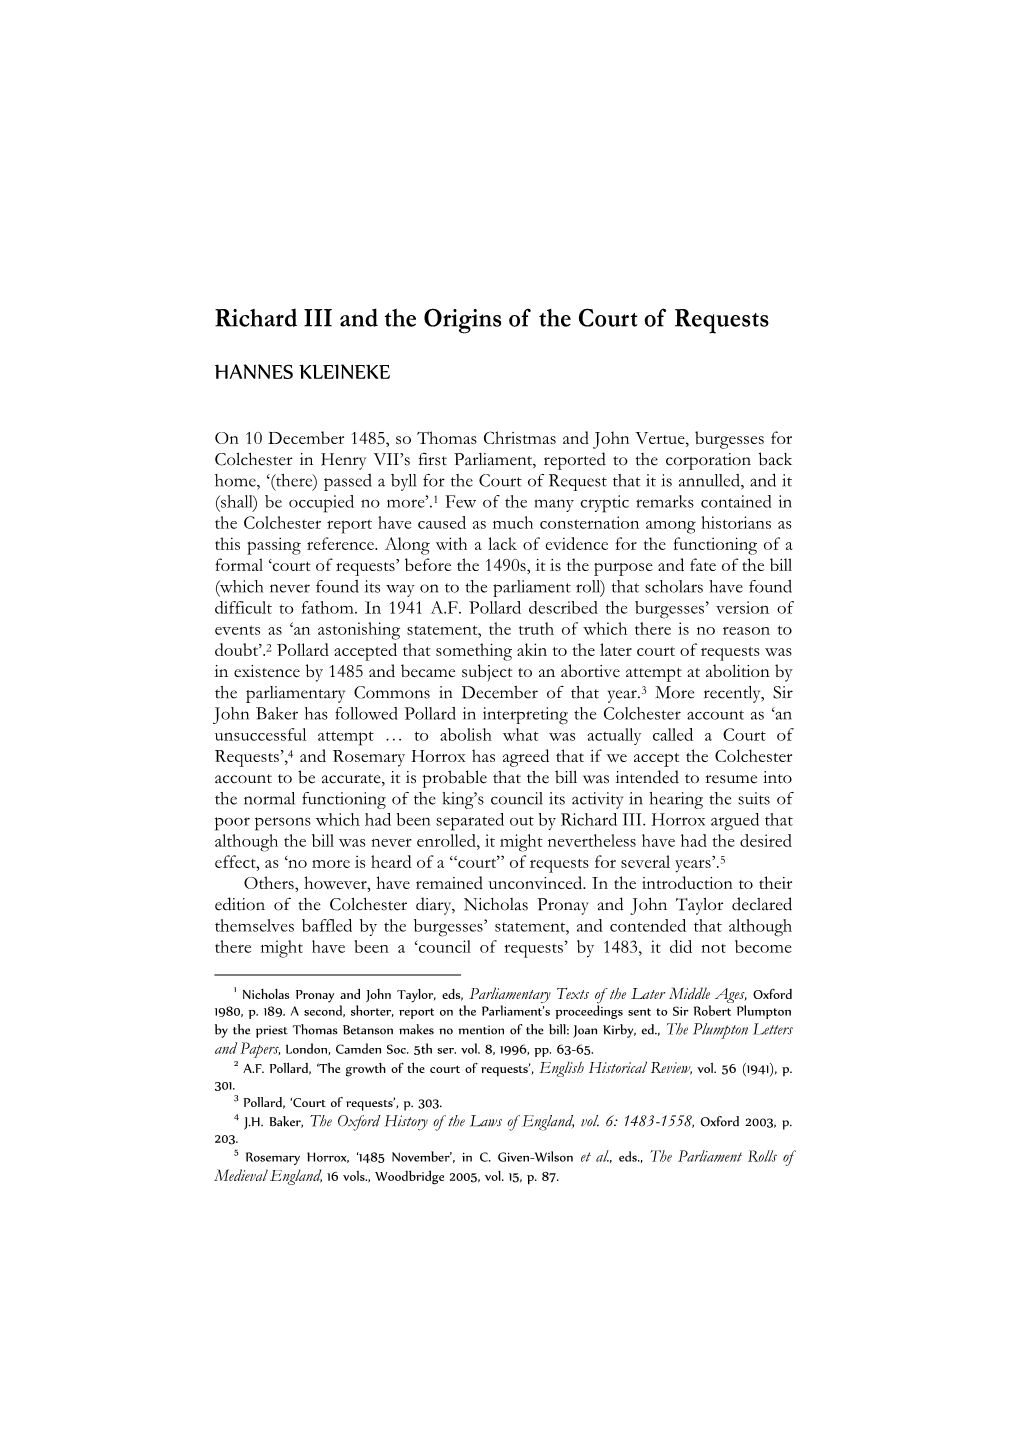 Richard III and the Origins of the Court of Requests